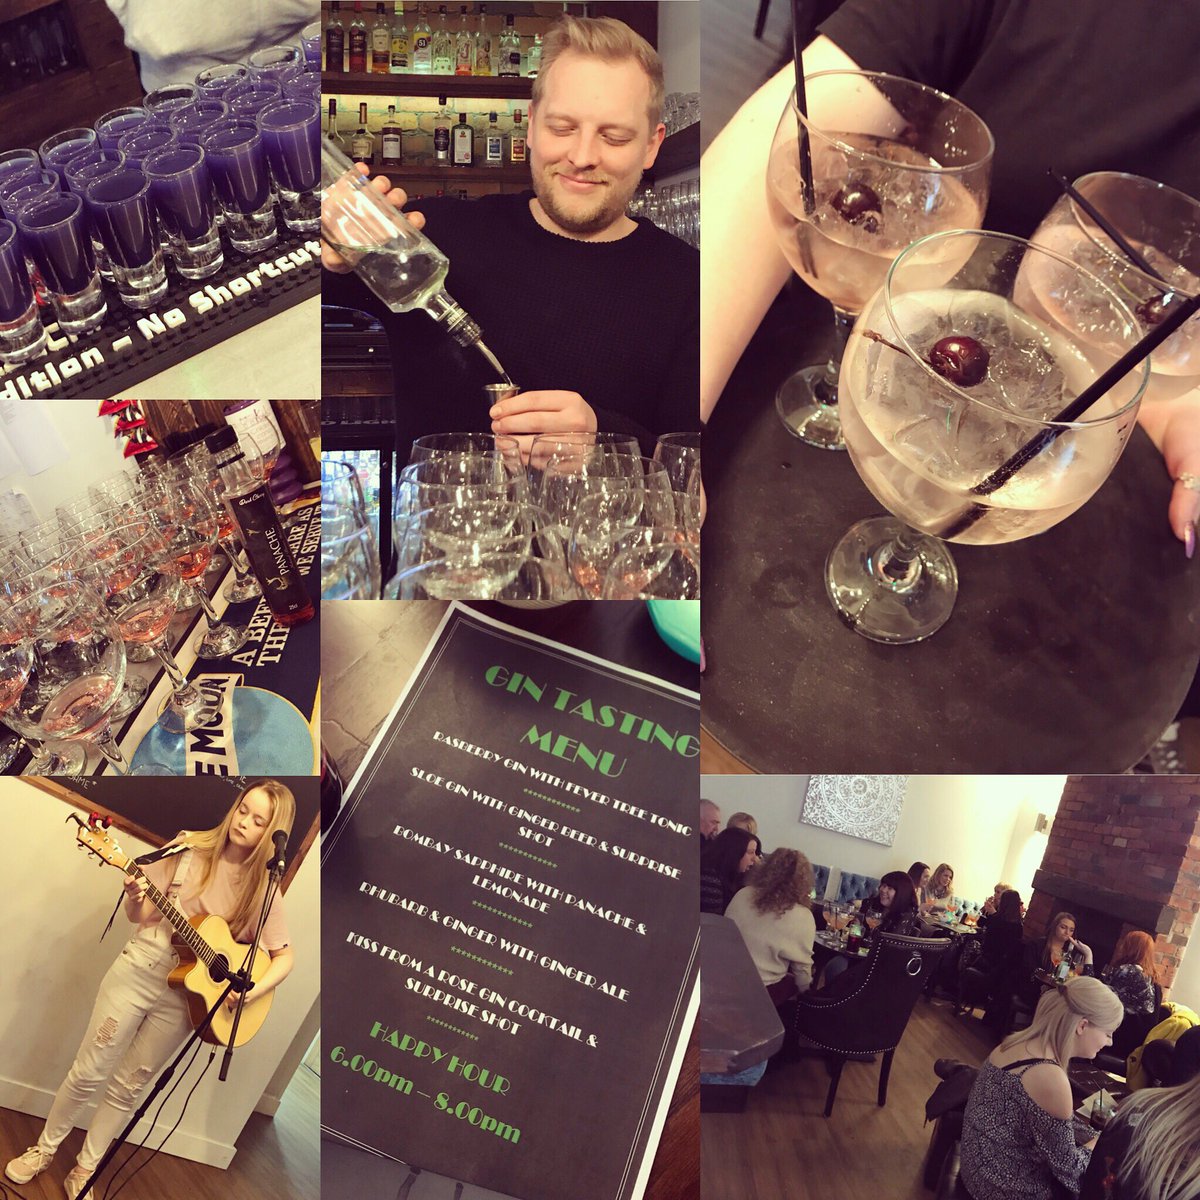 Great success on the #GinTasting 🎉🎉 be sure to keep your eyes peeled for the next one!! #horwich #gin #tastingevent #shots #nibbles #livemusic